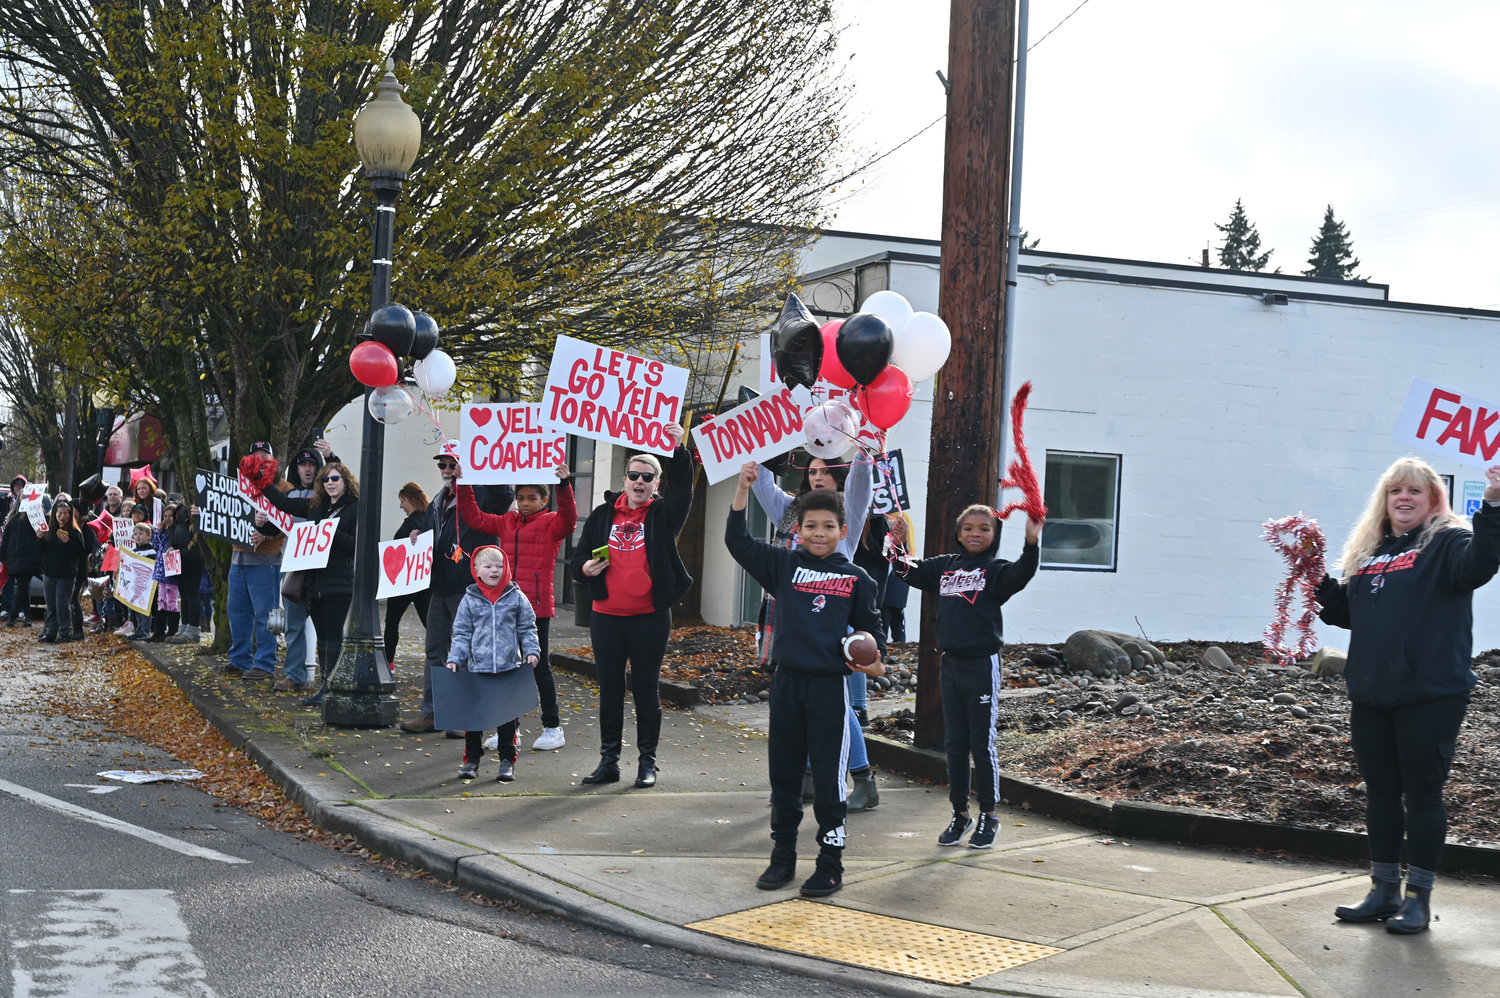 Tornado fans gather on the corner of Yelm Avenue and state Route 507 in support of the Yelm football team, who traveled to Art Crate field to face the Bellevue Wolverines in the 3A state semifinals. The team will compete in the state tournament on Dec. 3.